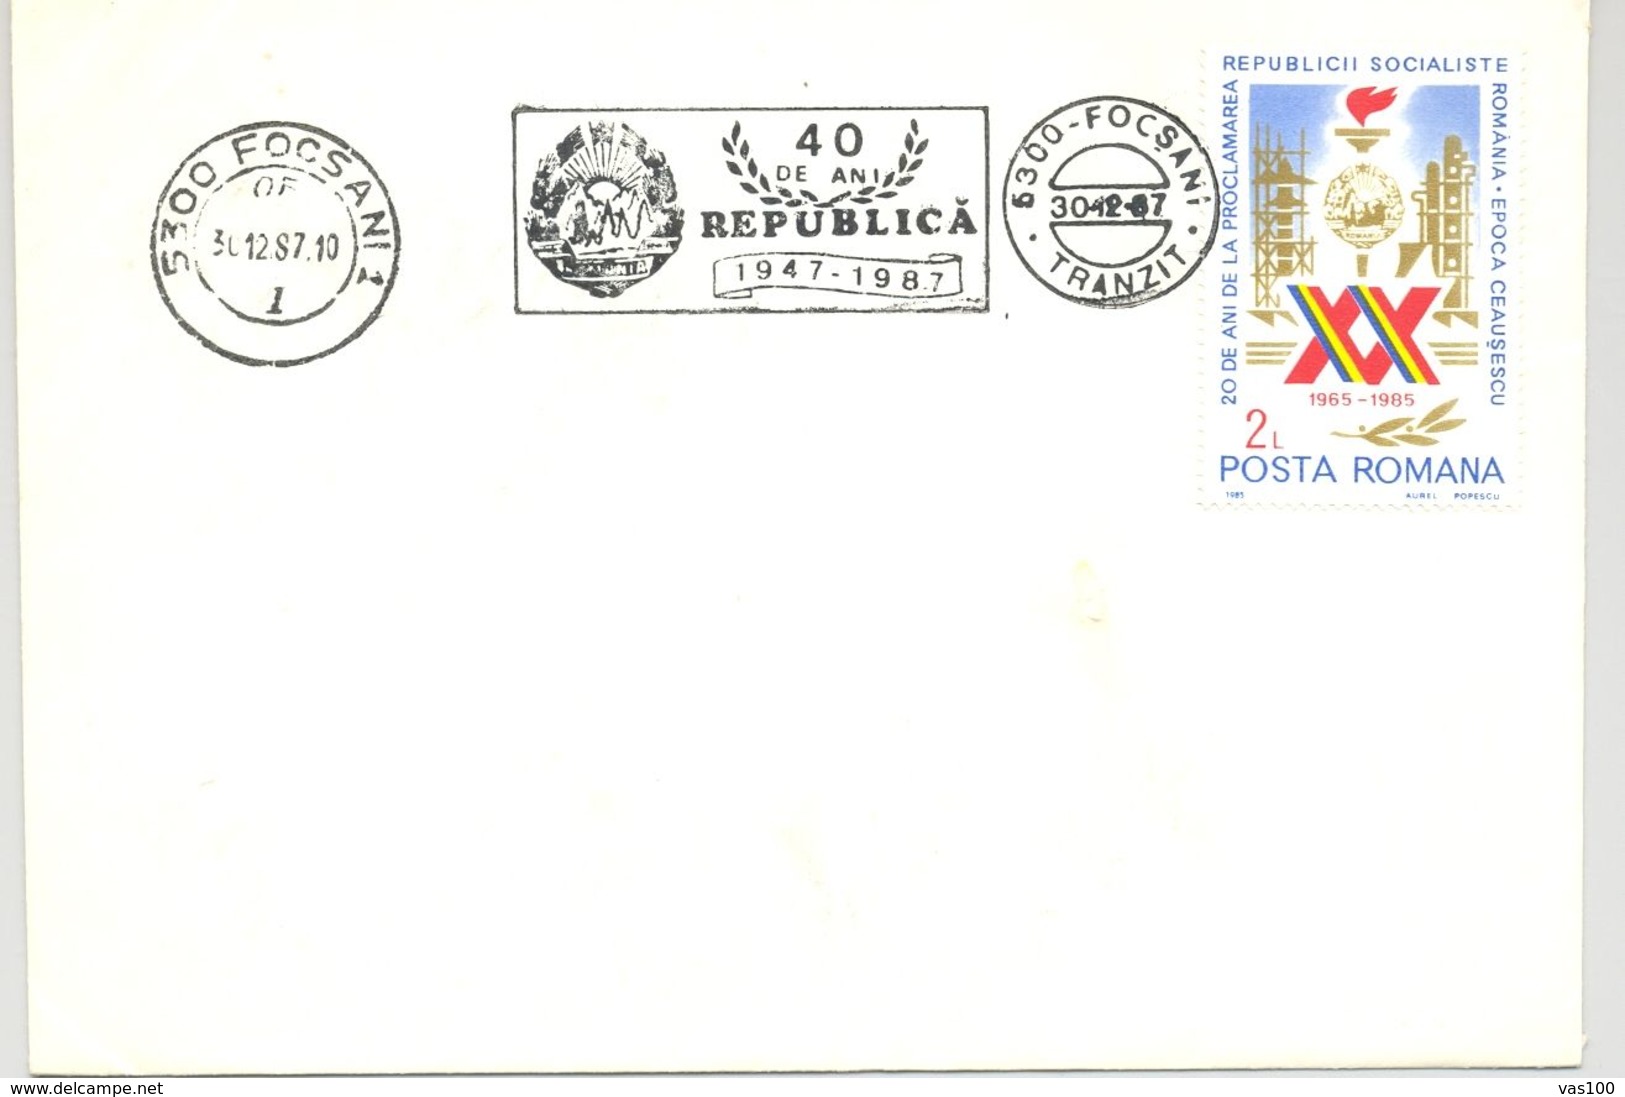 SOCIALIST REPUBLIC NATIONAL DAY, AUGUST 23, SPECIAL POSTMARK AND STAMP ON COVER, 1987, ROMANIA - Briefe U. Dokumente